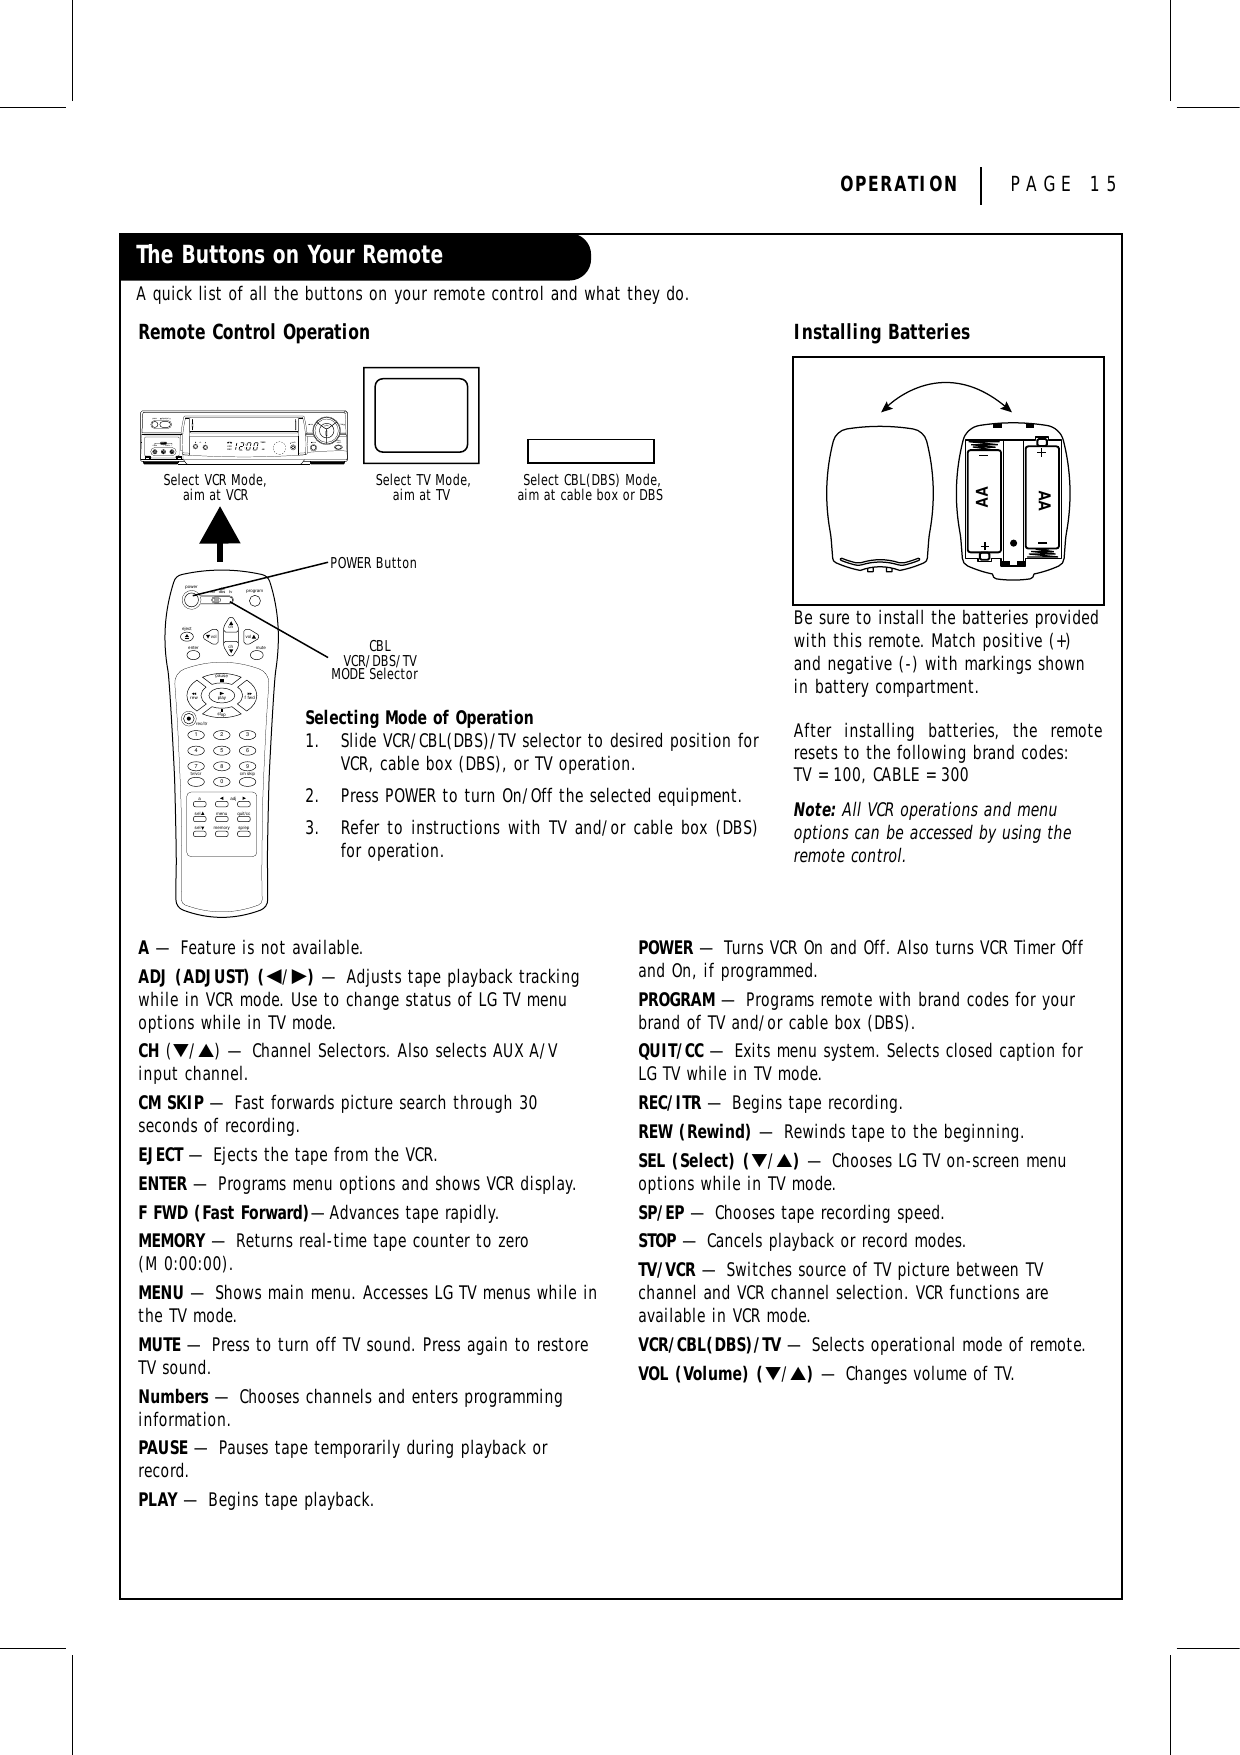 OPERATION  PAGE 15The Buttons on Your RemoteA quick list of all the buttons on your remote control and what they do.Installing BatteriesAAAABe sure to install the batteries providedwith this remote. Match positive (+)and negative (-) with markings shownin battery compartment.After installing batteries, the remoteresets to the following brand codes:TV = 100, CABLE = 300Note: All VCR operations and menuoptions can be accessed by using theremote control.A— Feature is not available.ADJ (ADJUST) (F/G)— Adjusts tape playback trackingwhile in VCR mode. Use to change status of LG TV menuoptions while in TV mode.CH (▼/▲) — Channel Selectors. Also selects AUX A/Vinput channel.CM SKIP — Fast forwards picture search through 30 seconds of recording.EJECT — Ejects the tape from the VCR.ENTER — Programs menu options and shows VCR display.F FWD (Fast Forward)—Advances tape rapidly.MEMORY — Returns real-time tape counter to zero (M 0:00:00).MENU — Shows main menu. Accesses LG TV menus while inthe TV mode.MUTE — Press to turn off TV sound. Press again to restoreTV sound.Numbers — Chooses channels and enters programminginformation.PAUSE — Pauses tape temporarily during playback orrecord.PLAY — Begins tape playback.POWER — Turns VCR On and Off. Also turns VCR Timer Offand On, if programmed.PROGRAM — Programs remote with brand codes for yourbrand of TV and/or cable box (DBS).QUIT/CC — Exits menu system. Selects closed caption forLG TV while in TV mode.REC/ITR — Begins tape recording.REW (Rewind) — Rewinds tape to the beginning.SEL (Select) (▼/▲)— Chooses LG TV on-screen menuoptions while in TV mode.SP/EP — Chooses tape recording speed.STOP — Cancels playback or record modes.TV/VCR — Switches source of TV picture between TV channel and VCR channel selection. VCR functions are available in VCR mode.VCR/CBL(DBS)/TV — Selects operational mode of remote.VOL (Volume) (▼/▲) — Changes volume of TV.Remote Control Operationvcr cbl/dbs tvpower programchchvolvolejectenter muterec/itr123456789tv/vcradja0cm skipselselmenu quit/ccmemory sp/eppausestopplayrew f fwdSelect VCR Mode,aim at VCR Select TV Mode,aim at TV  Select CBL(DBS) Mode,aim at cable box or DBS POWER ButtonMODE SelectorCBLVCR/DBS/TVSelecting Mode of Operation1. Slide VCR/CBL(DBS)/TV selector to desired position forVCR, cable box (DBS), or TV operation.2. Press POWER to turn On/Off the selected equipment.3. Refer to instructions with TV and/or cable box (DBS)for operation.easywatchpauserec/itrchvideo l - audio - rstop/ejectpoweraux 2playrew f fwdVCRRECTIMERAMzenith